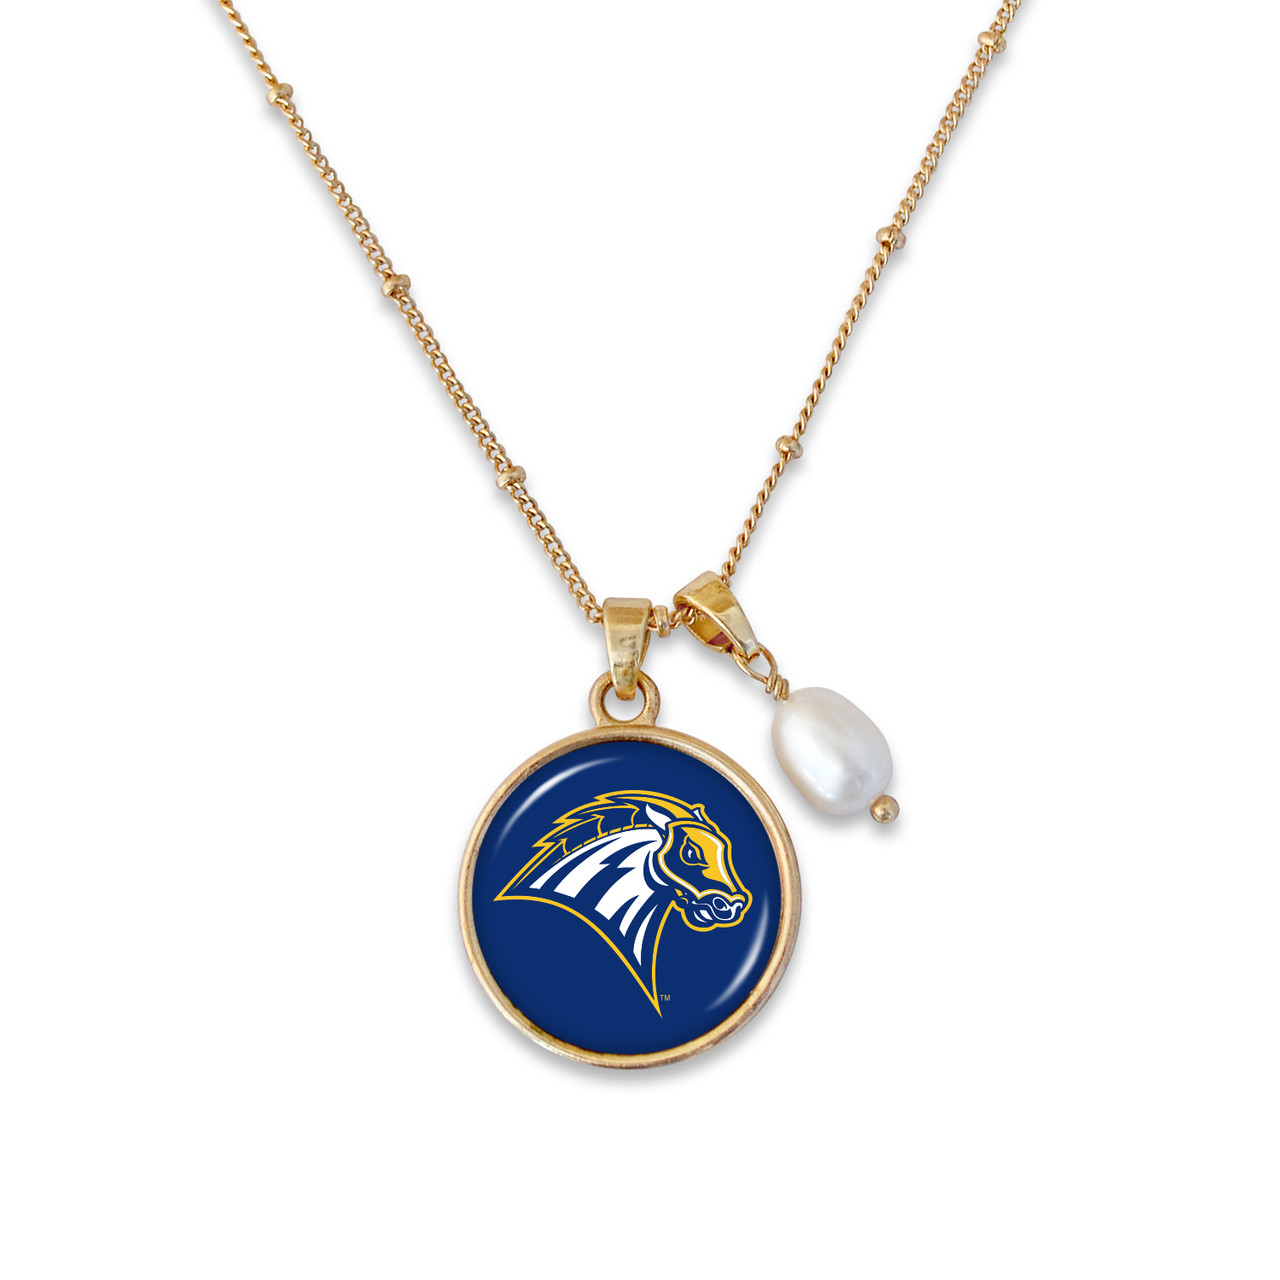 New Haven Chargers Necklace - Diana